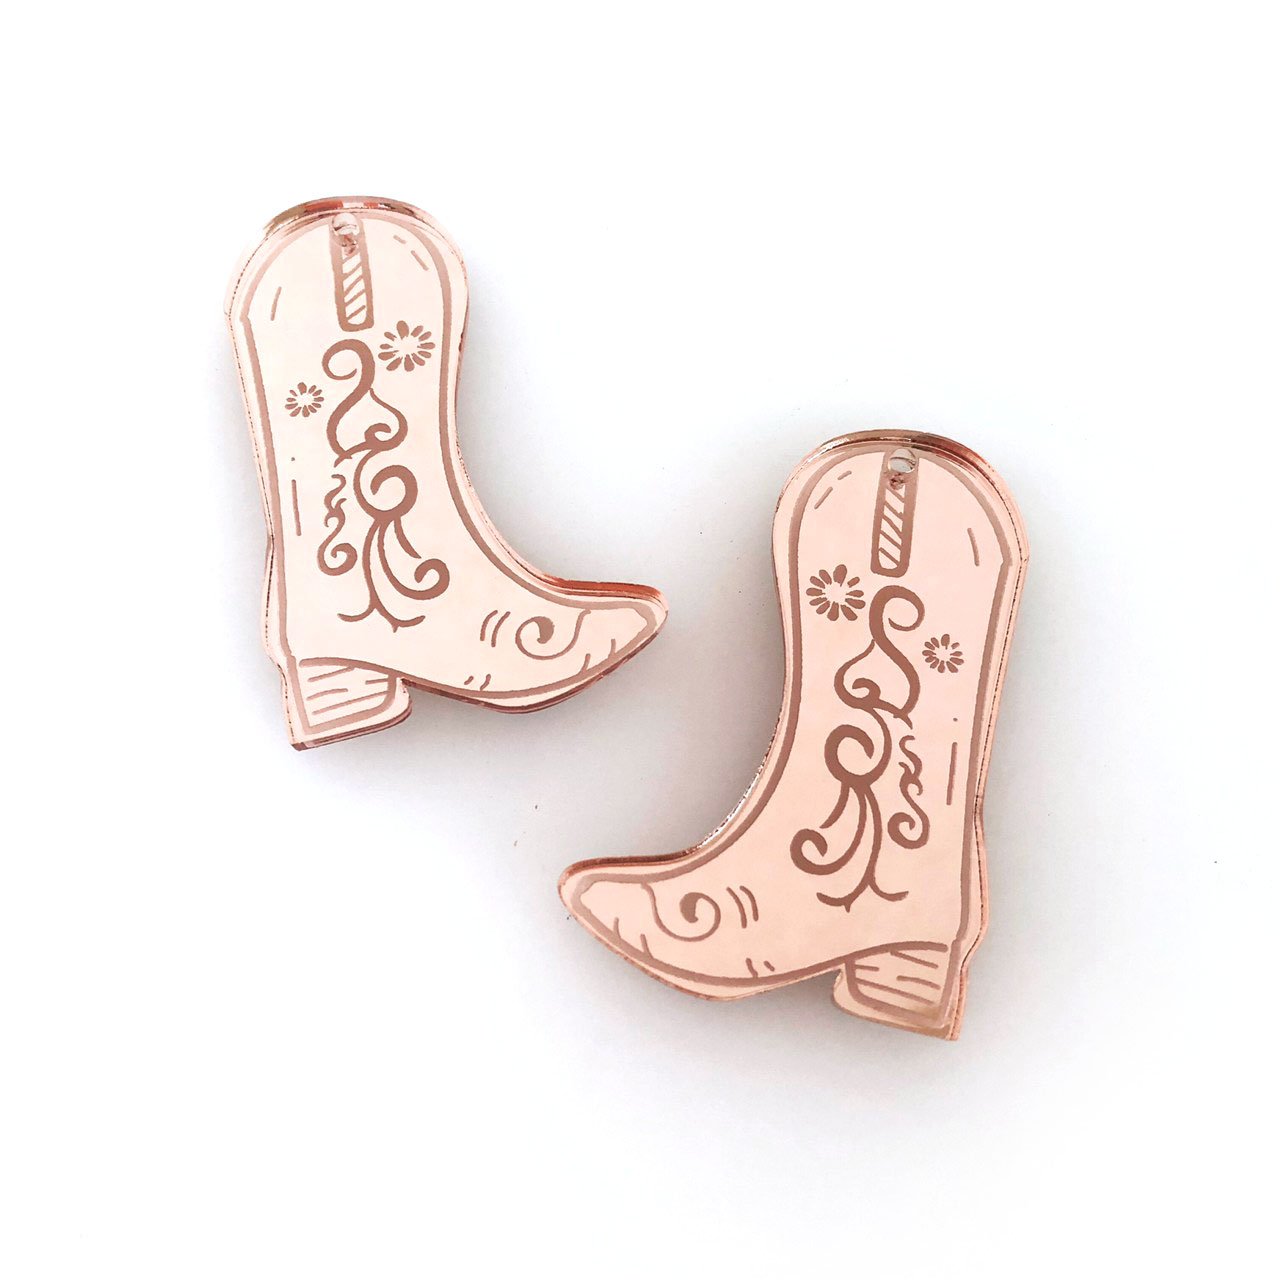 Crafty Cuts Laser Pty Ltd Paintfill_shapes © Etched Cowgirl Boots - 3 pair set